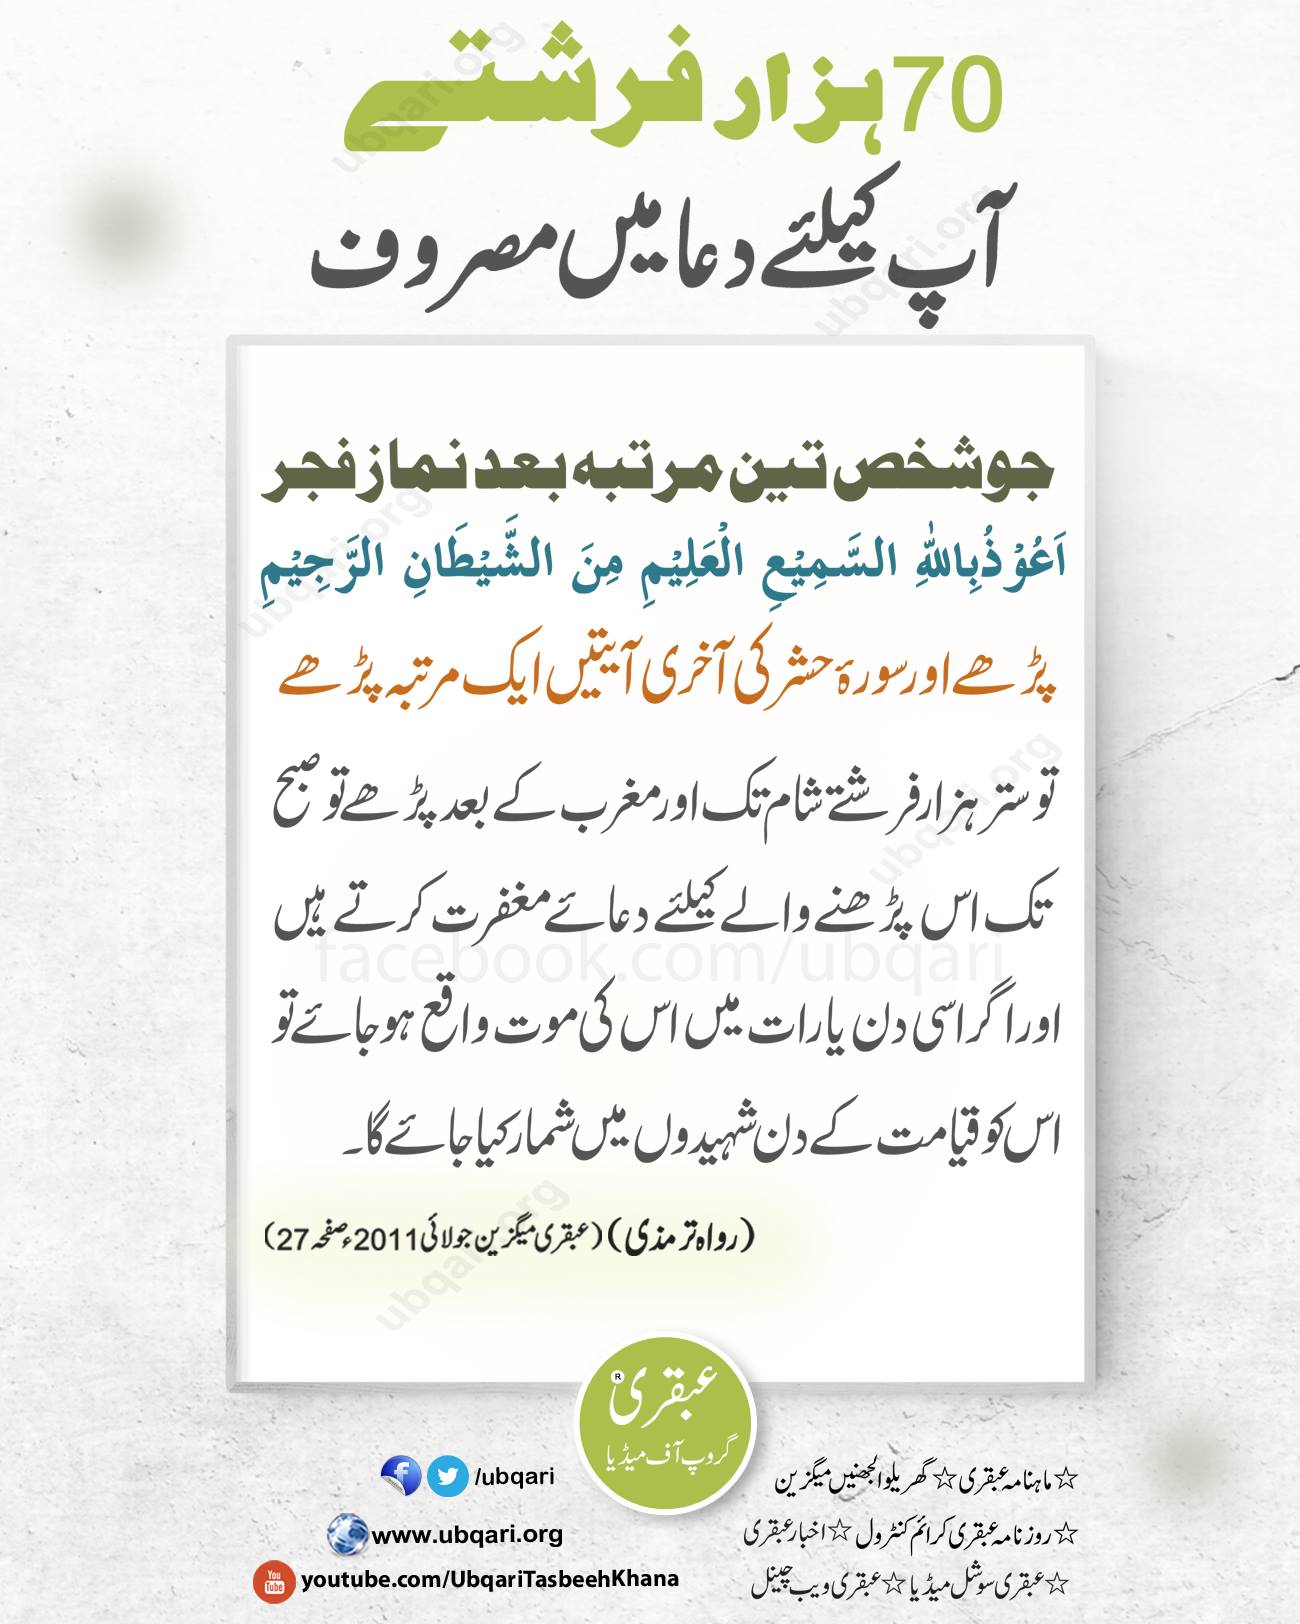 special wazifa for muslims